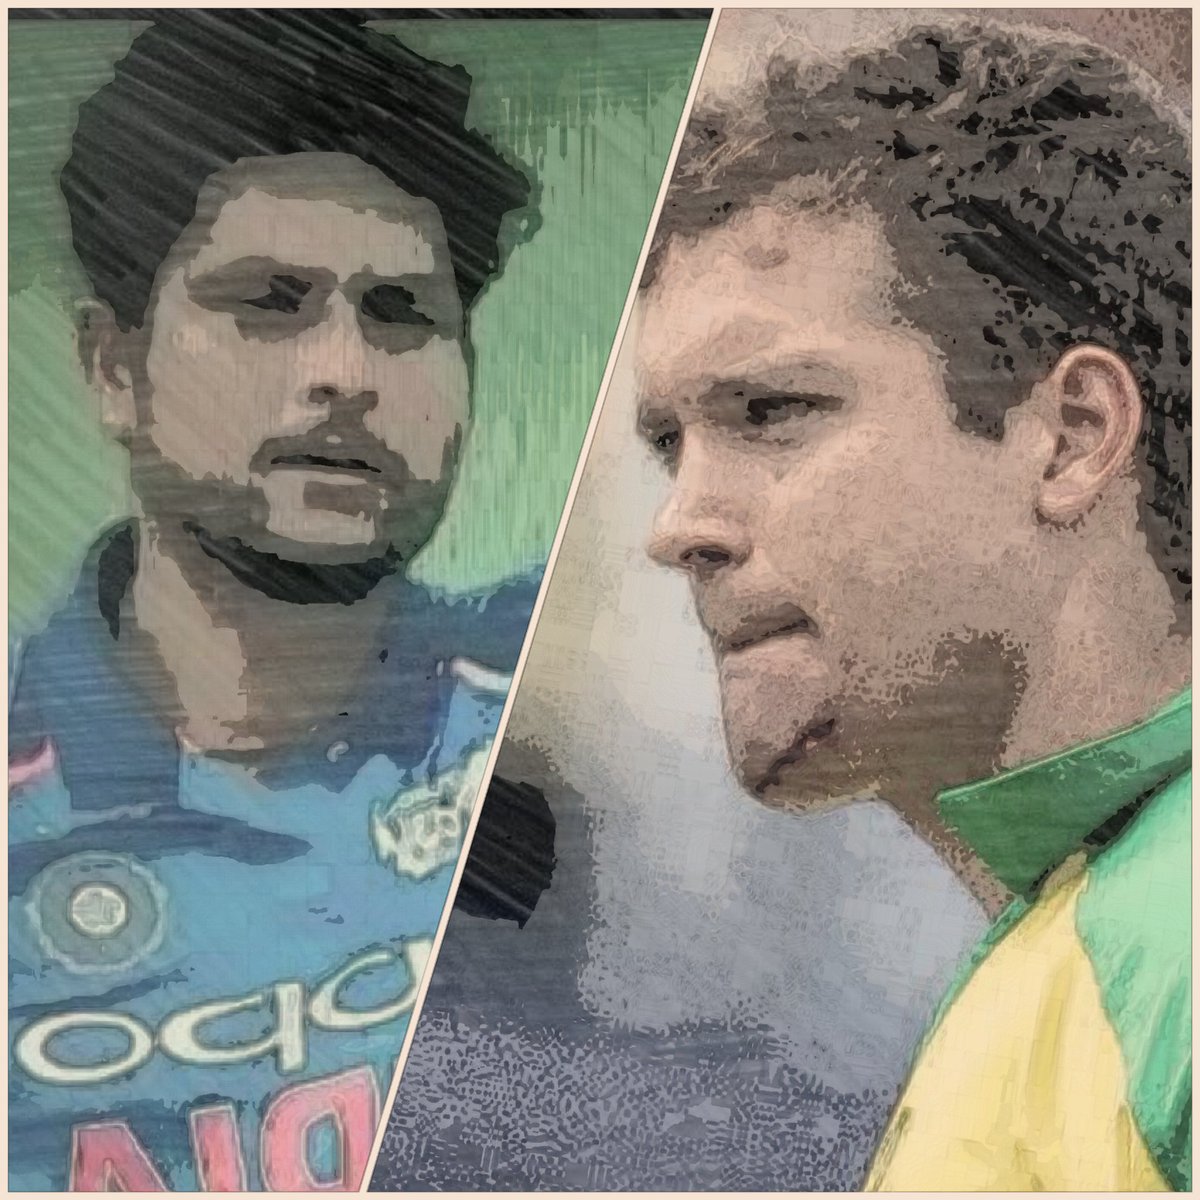  Player Battles:  #INDvAUS9. Kuldeep vs Alex Carey ODI: 40 balls, 4 wickets T20: 8 balls, 1 wicket Carey is a wicket keeper and finisher for Australia 4 wickets have been on balls turning away from Carey 1 wicket on googlyNext tweet for more...